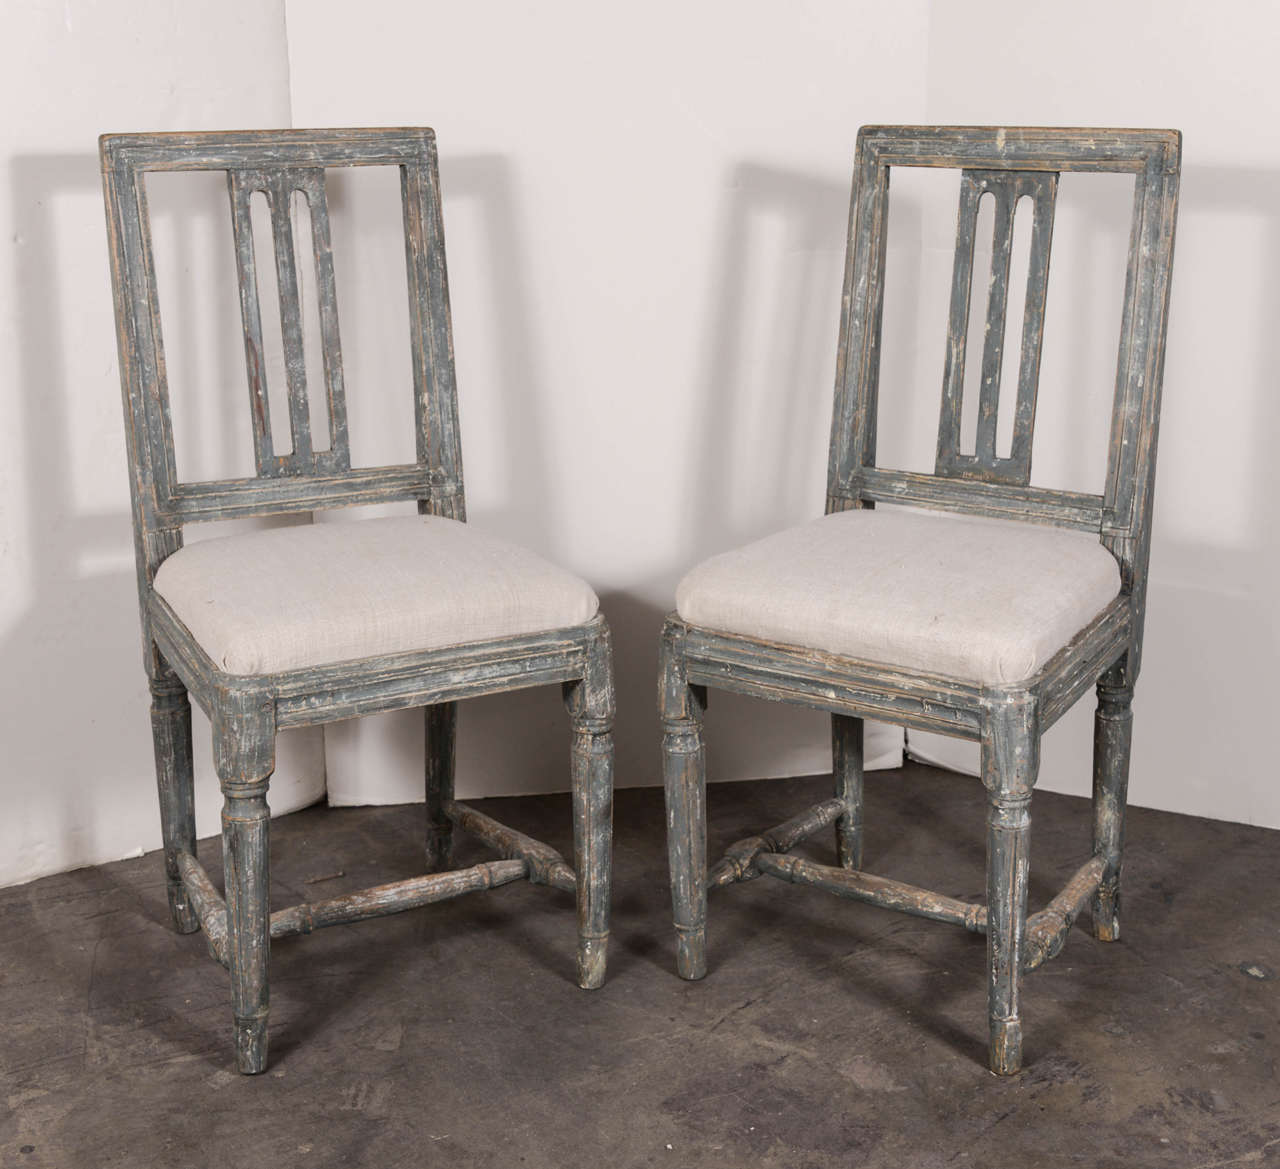 Lovely set of six Swedish period Gustavian chairs with original scraped blue paint and newly upholstered vintage linen seats.